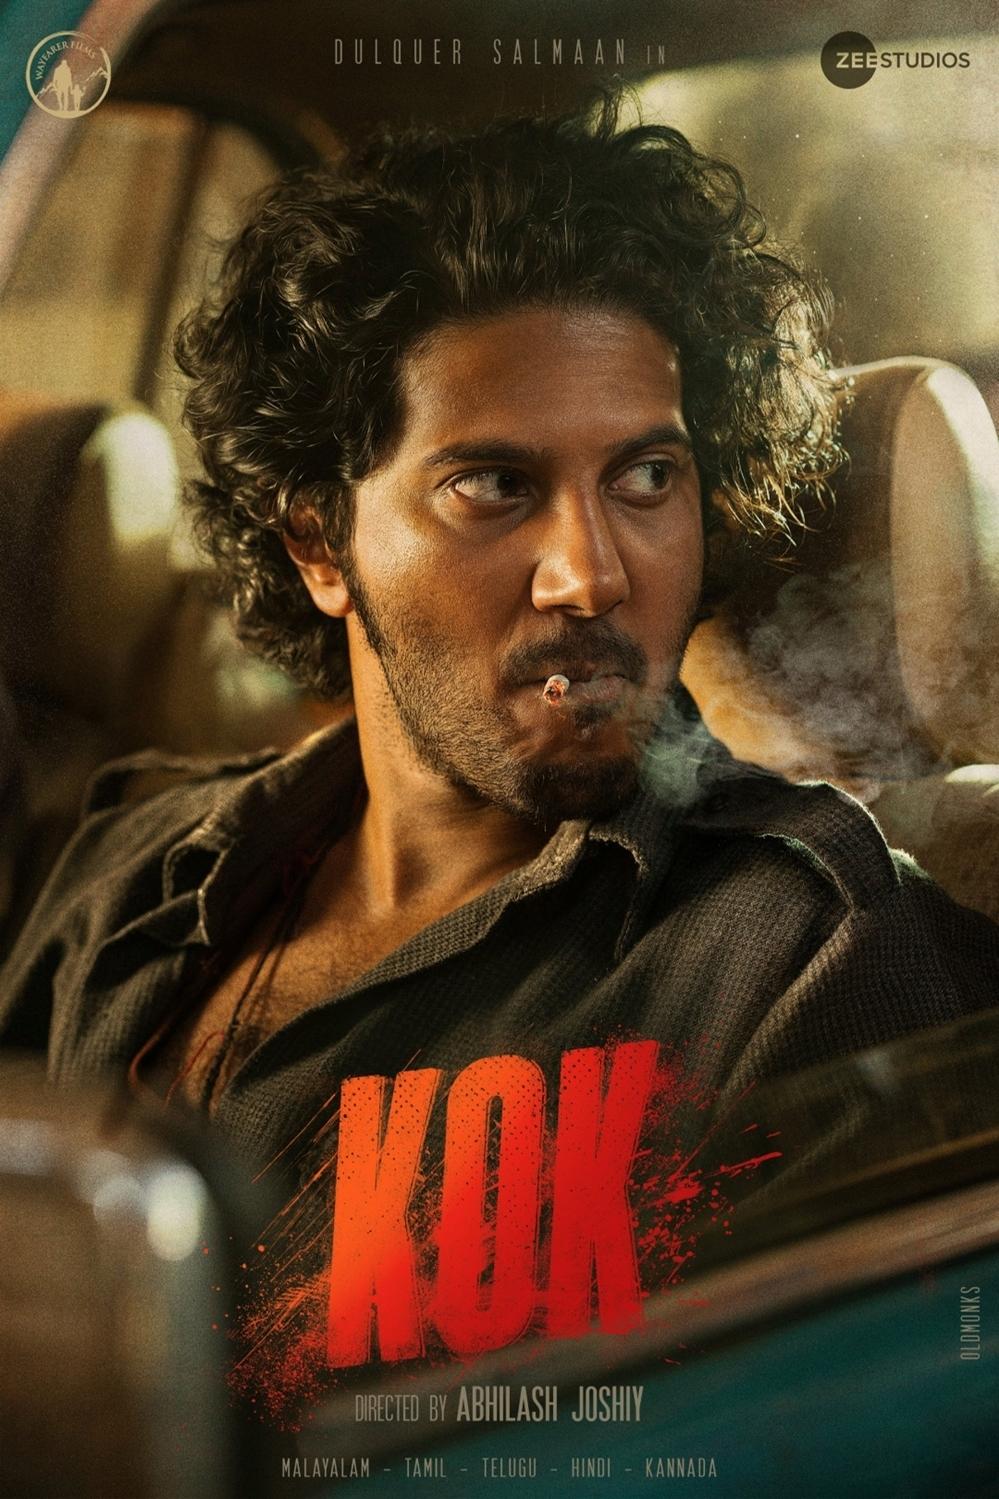 King of Kotha (September 1): The plot is set in a crime-ridden town and focuses around Inspector Shahul. As a local goon named Kannan bhai and his gang take over the town, he is on a mission to plan the return of the 'King' in a deft manner. You should not miss out on this Friday release.